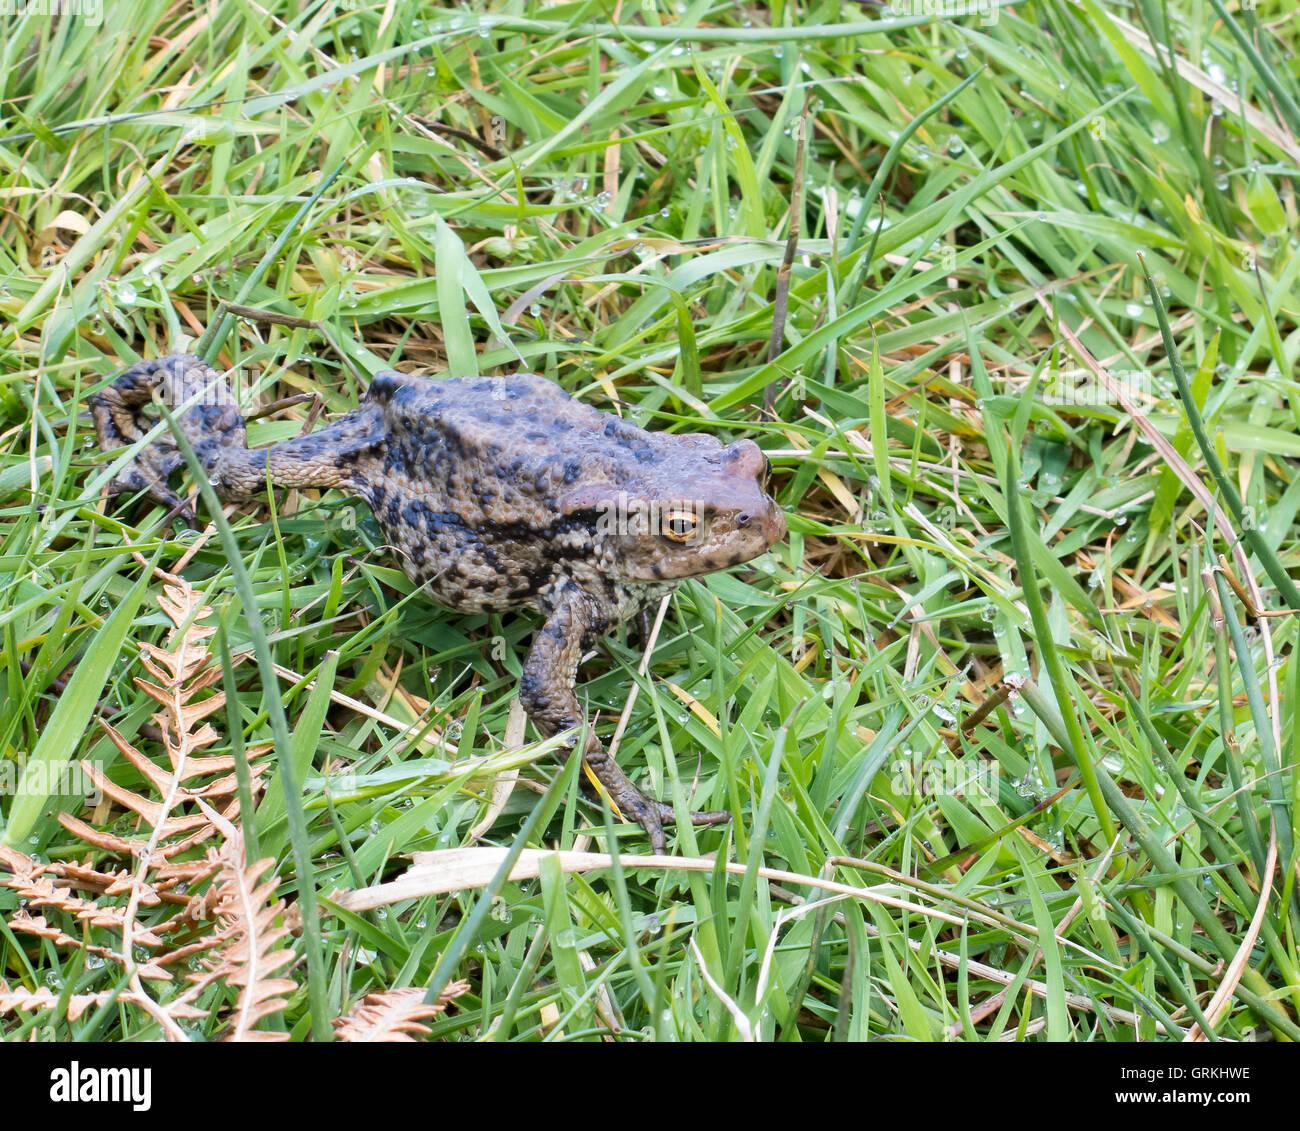 Toad walking across grass Stock Photo